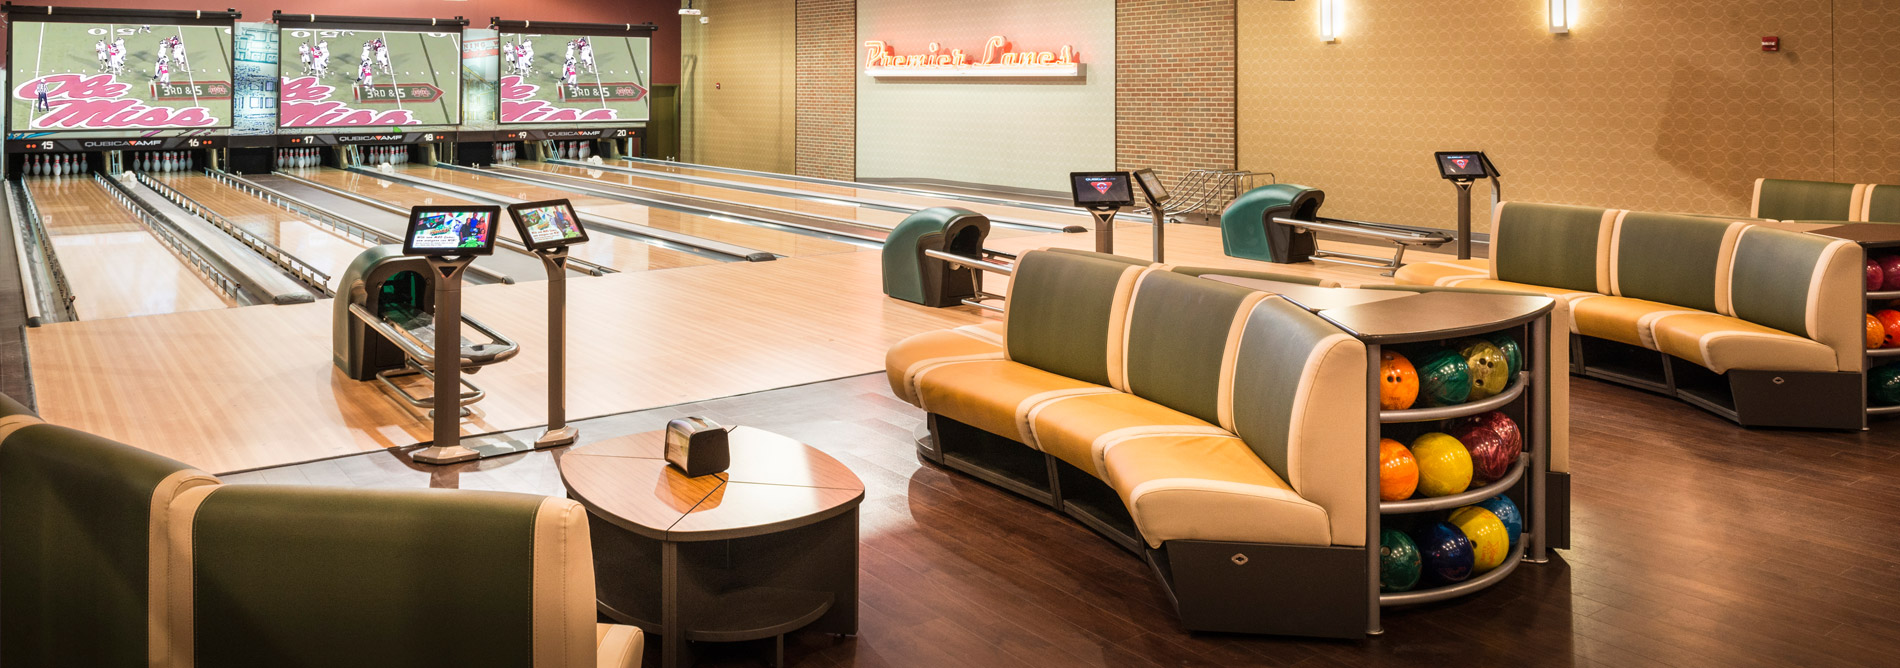 Bowling-QubicaAMF-furniture-harmony-infinity-banner2.jpg